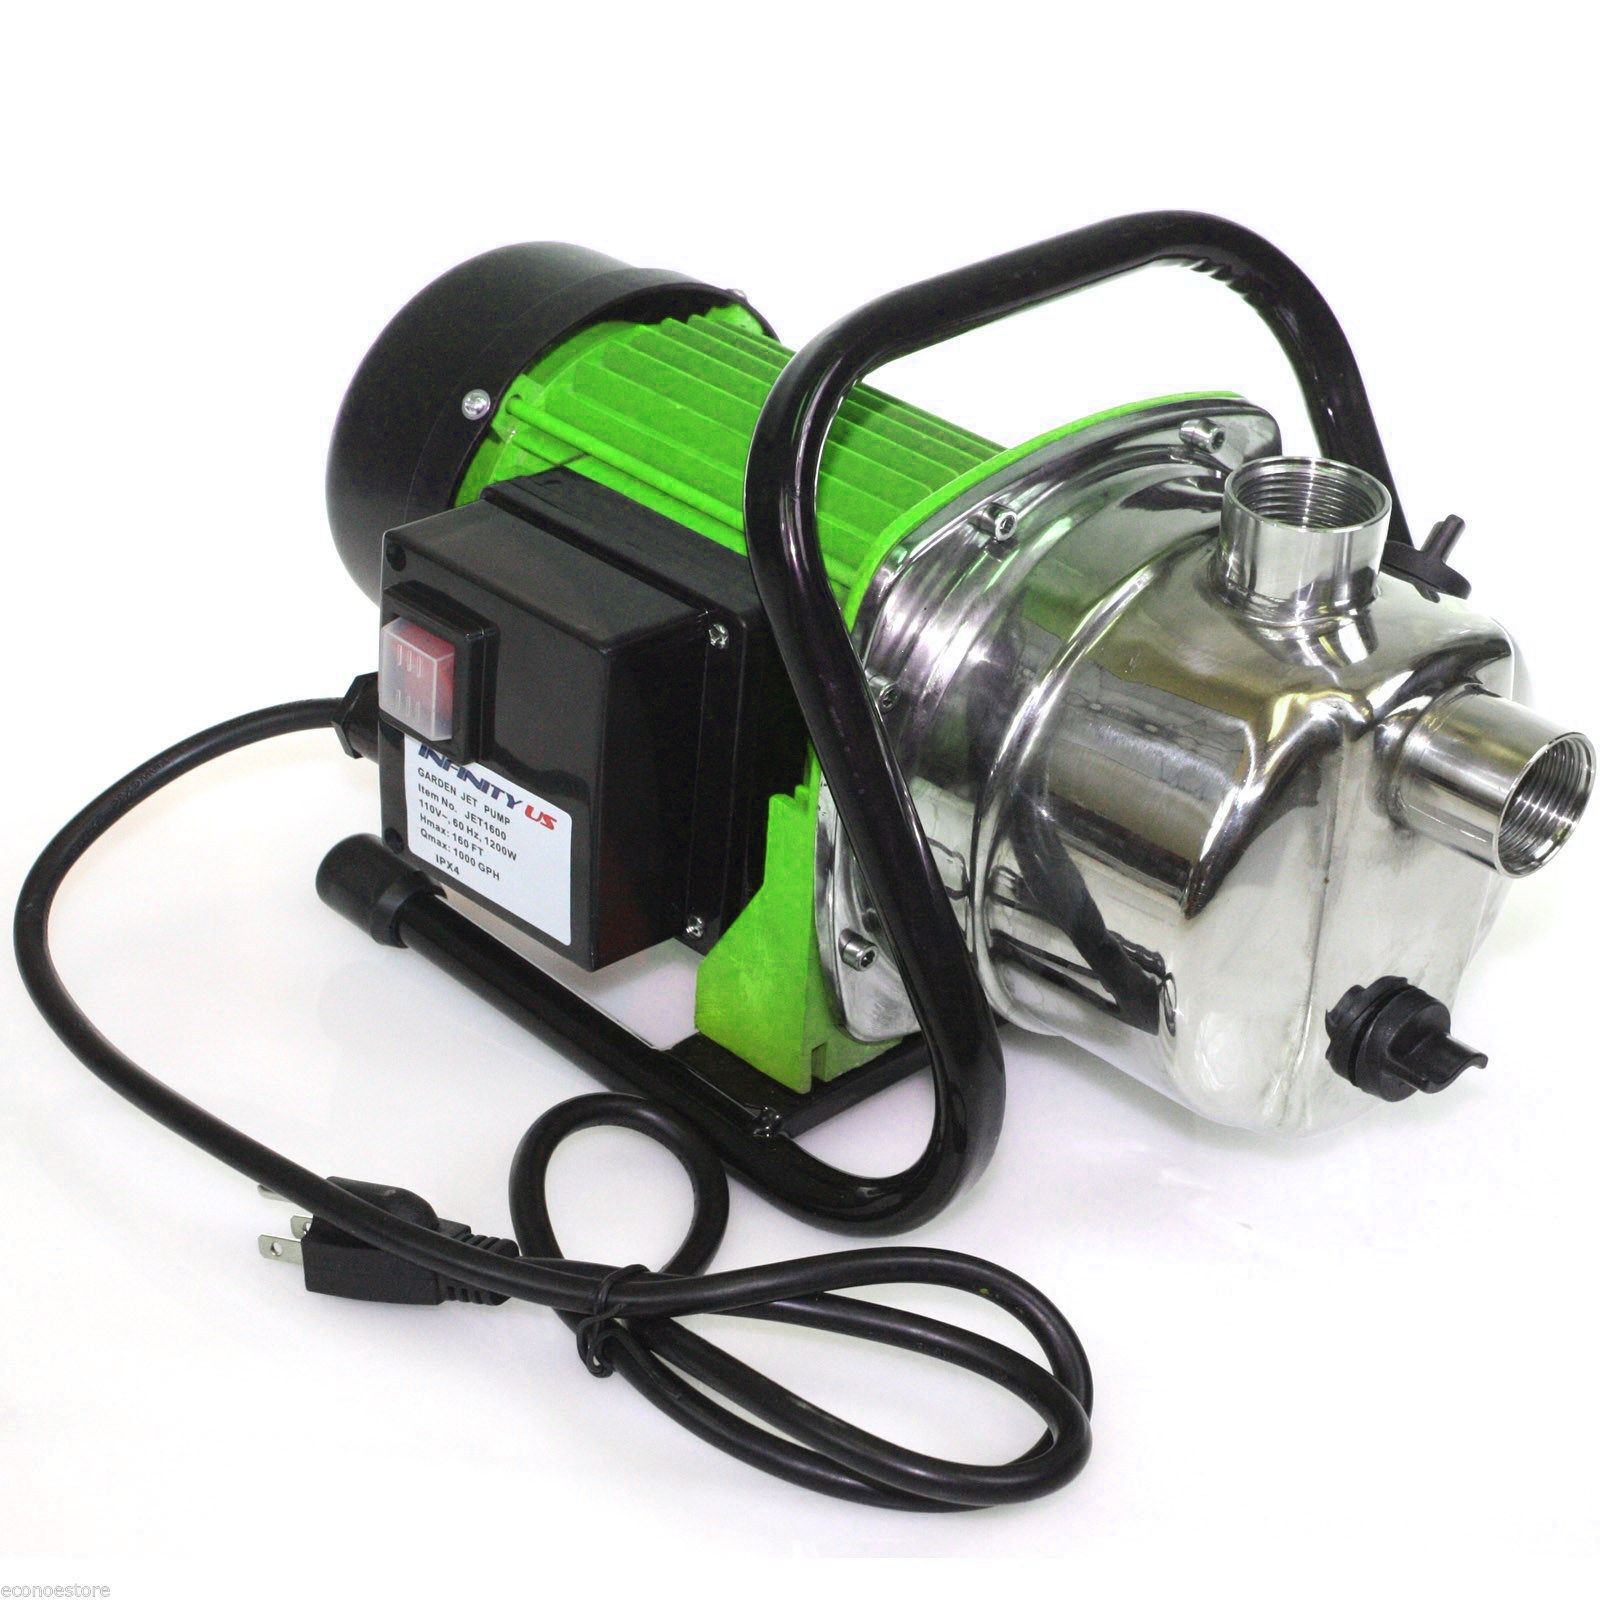 1000 GPH Stainless Steel Booster Water Pressure Pump 1200W for Lawn Garden Yard